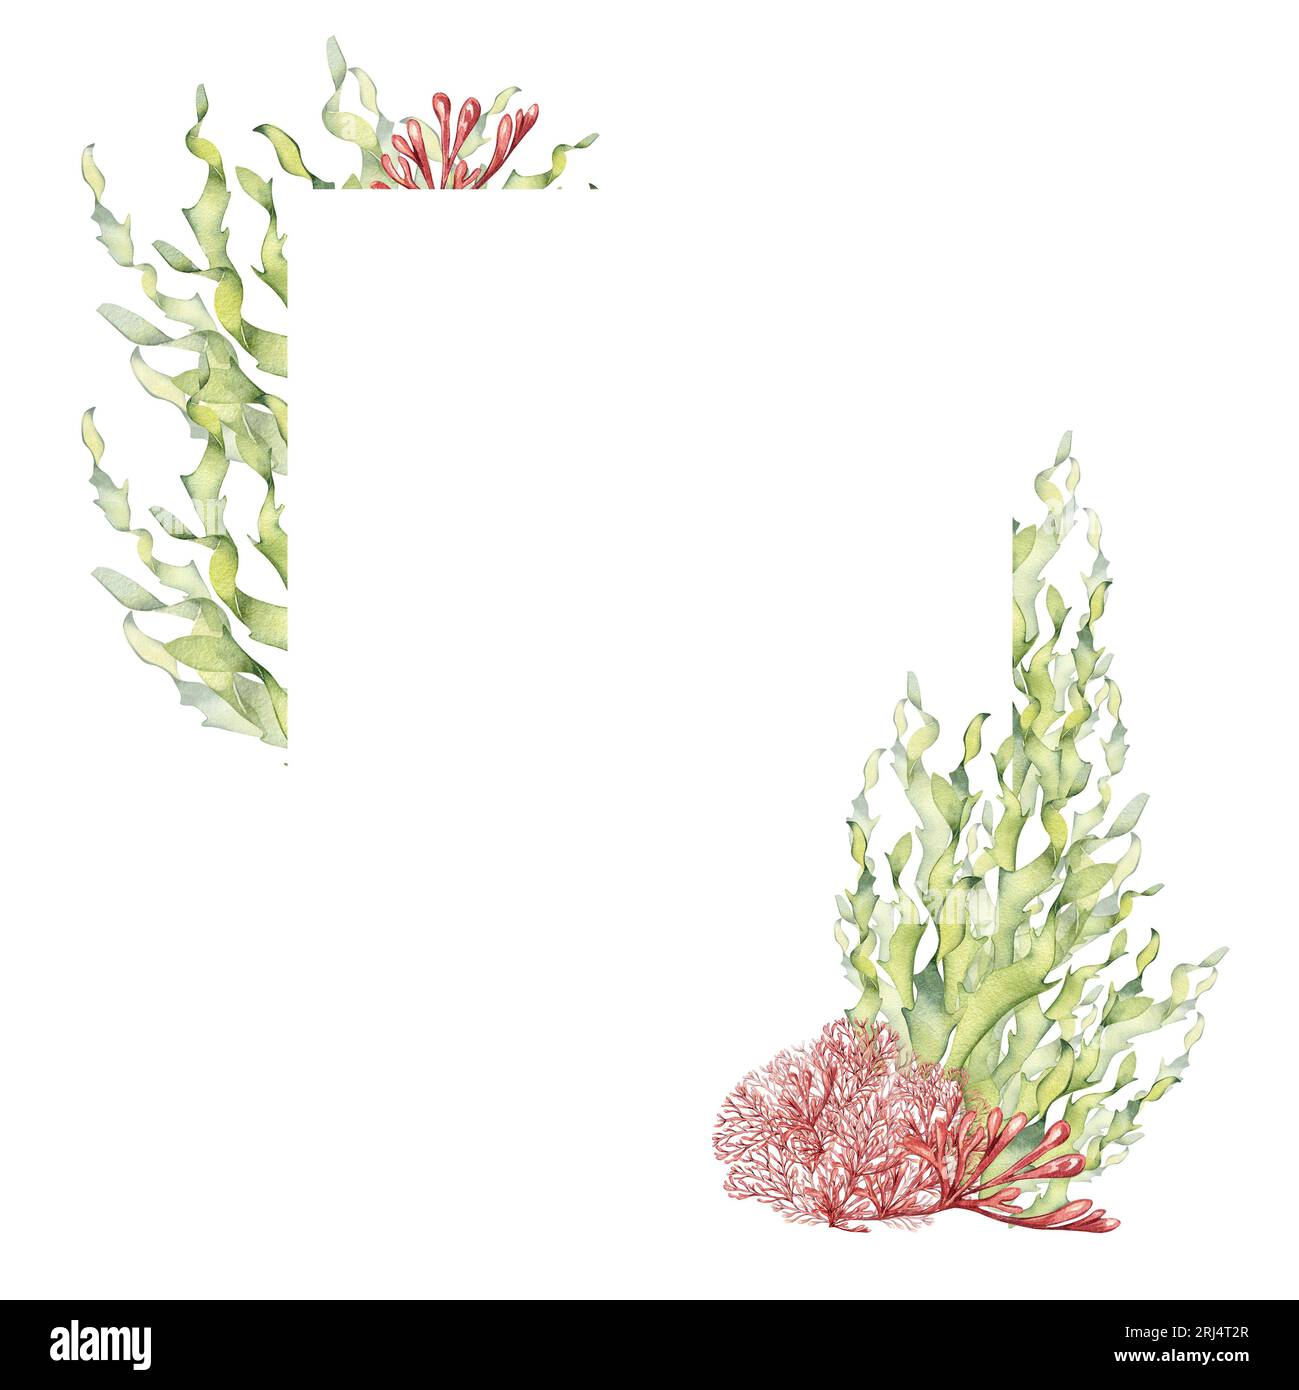 Frame of sea plants, coral watercolor illustration isolated on white background. Pink agar agar seaweed, laminaria hand drawn. Design element for Stock Photo